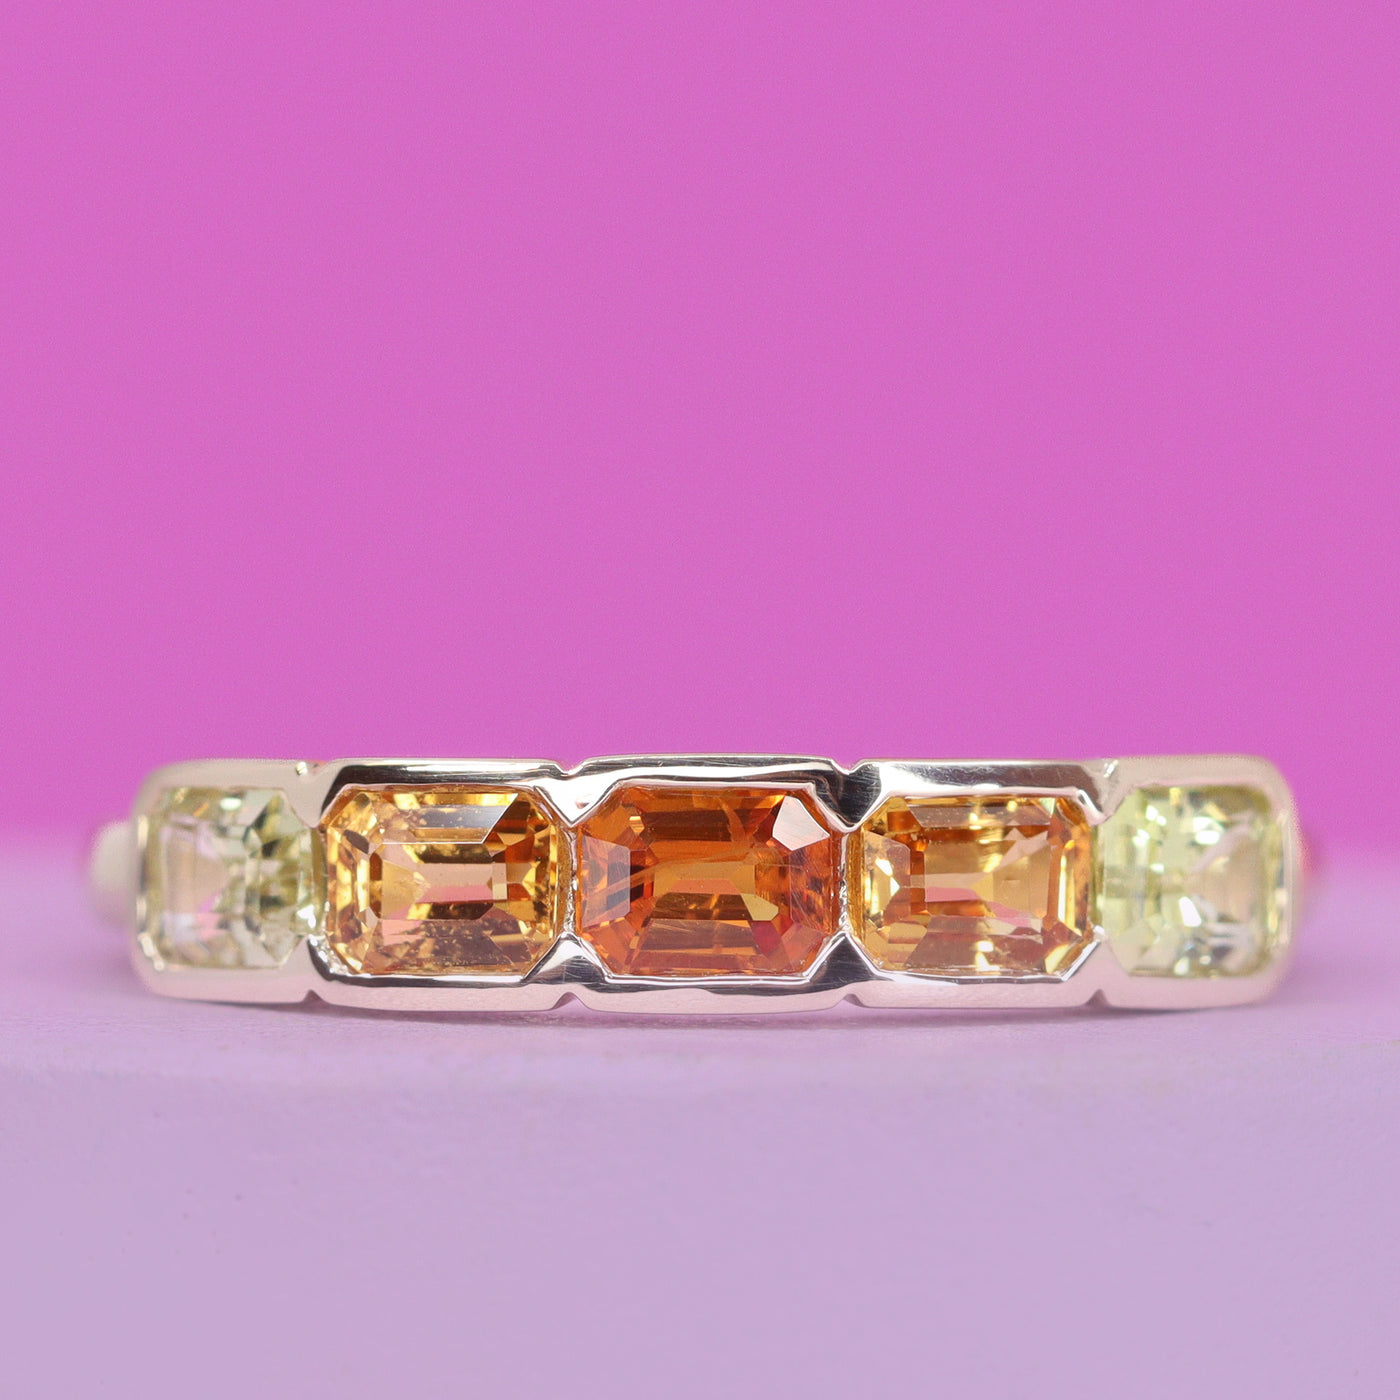 Clementine - Emerald Cut Orange and Yellow Sapphire 5 Stone Half Rubover Eternity Style Ring in 9ct Yellow Gold - Ready-to-Wear